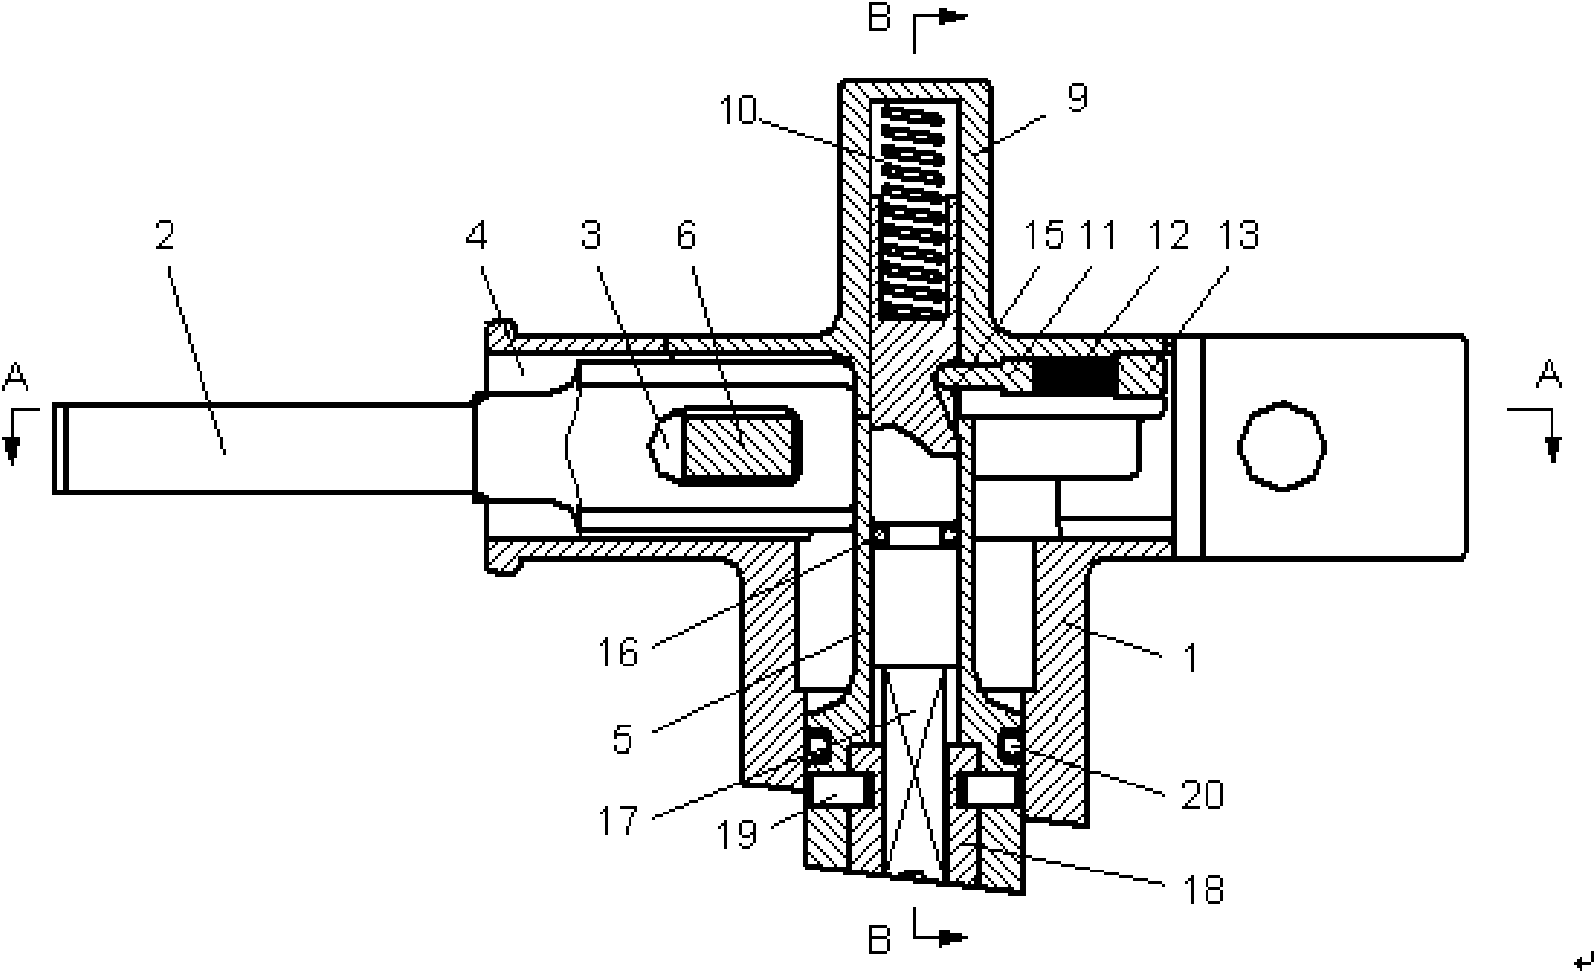 Method for rapidly disassembling radome on airplane and rotating locks